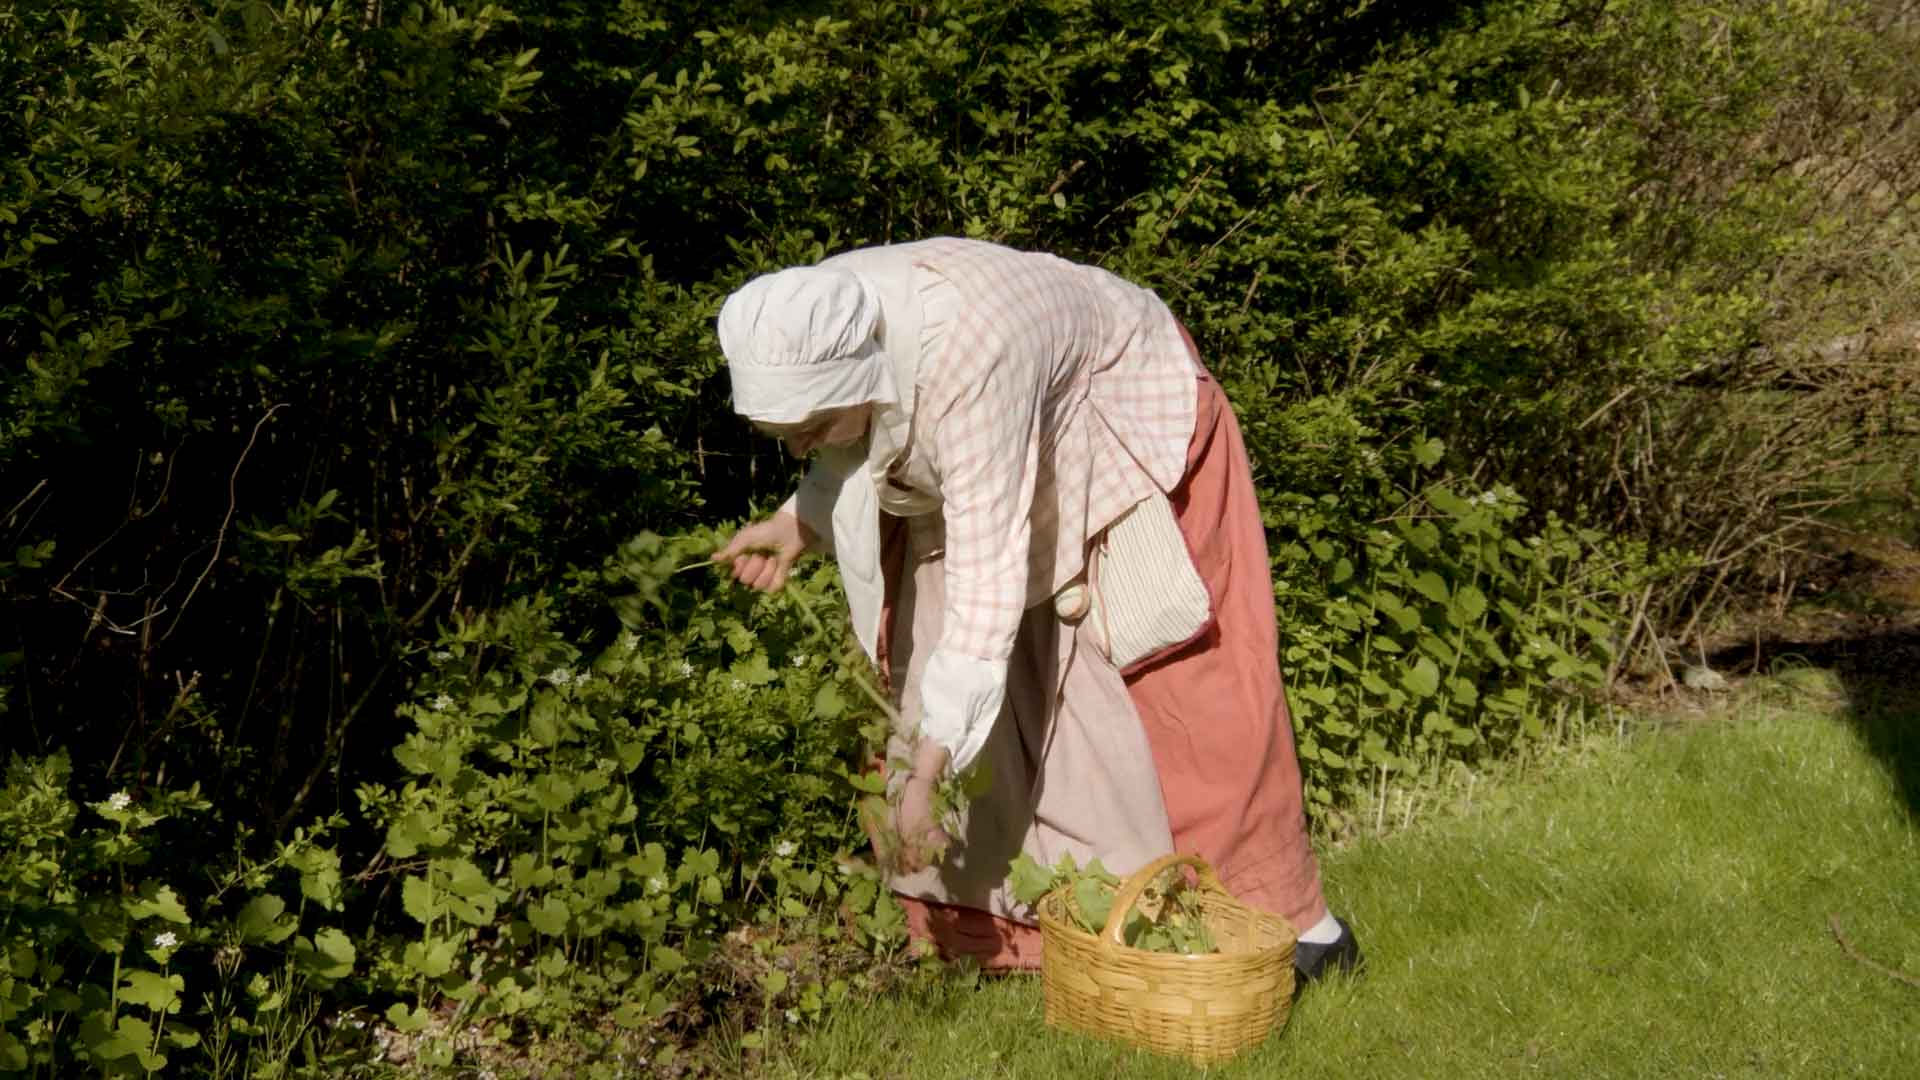 woman in colonial era clothing demonstrates how to forage for food